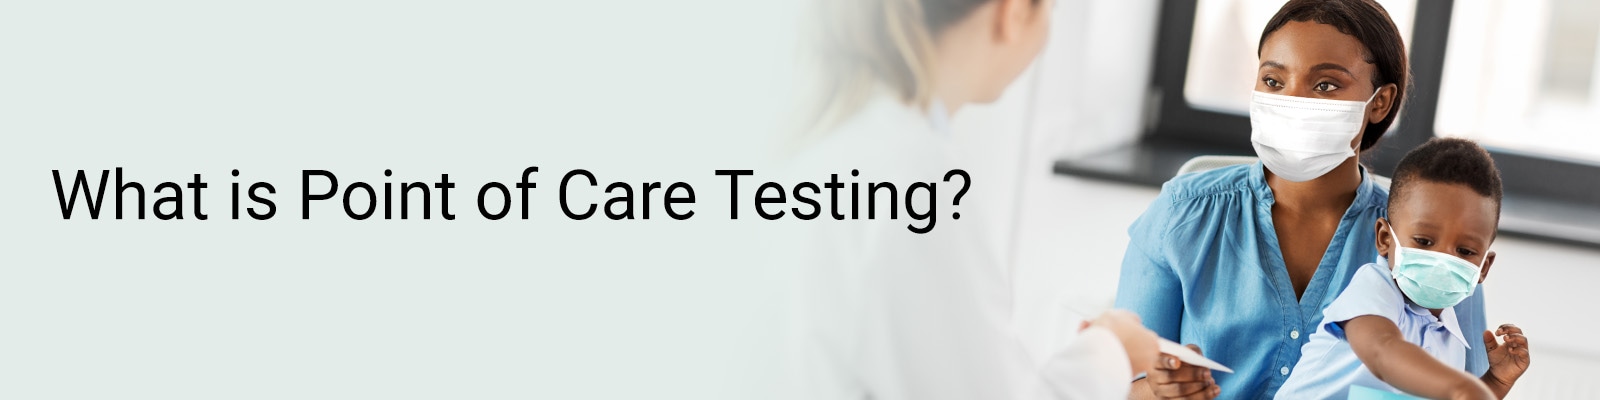 What is Point of Care Testing? – Henry Schein Medical